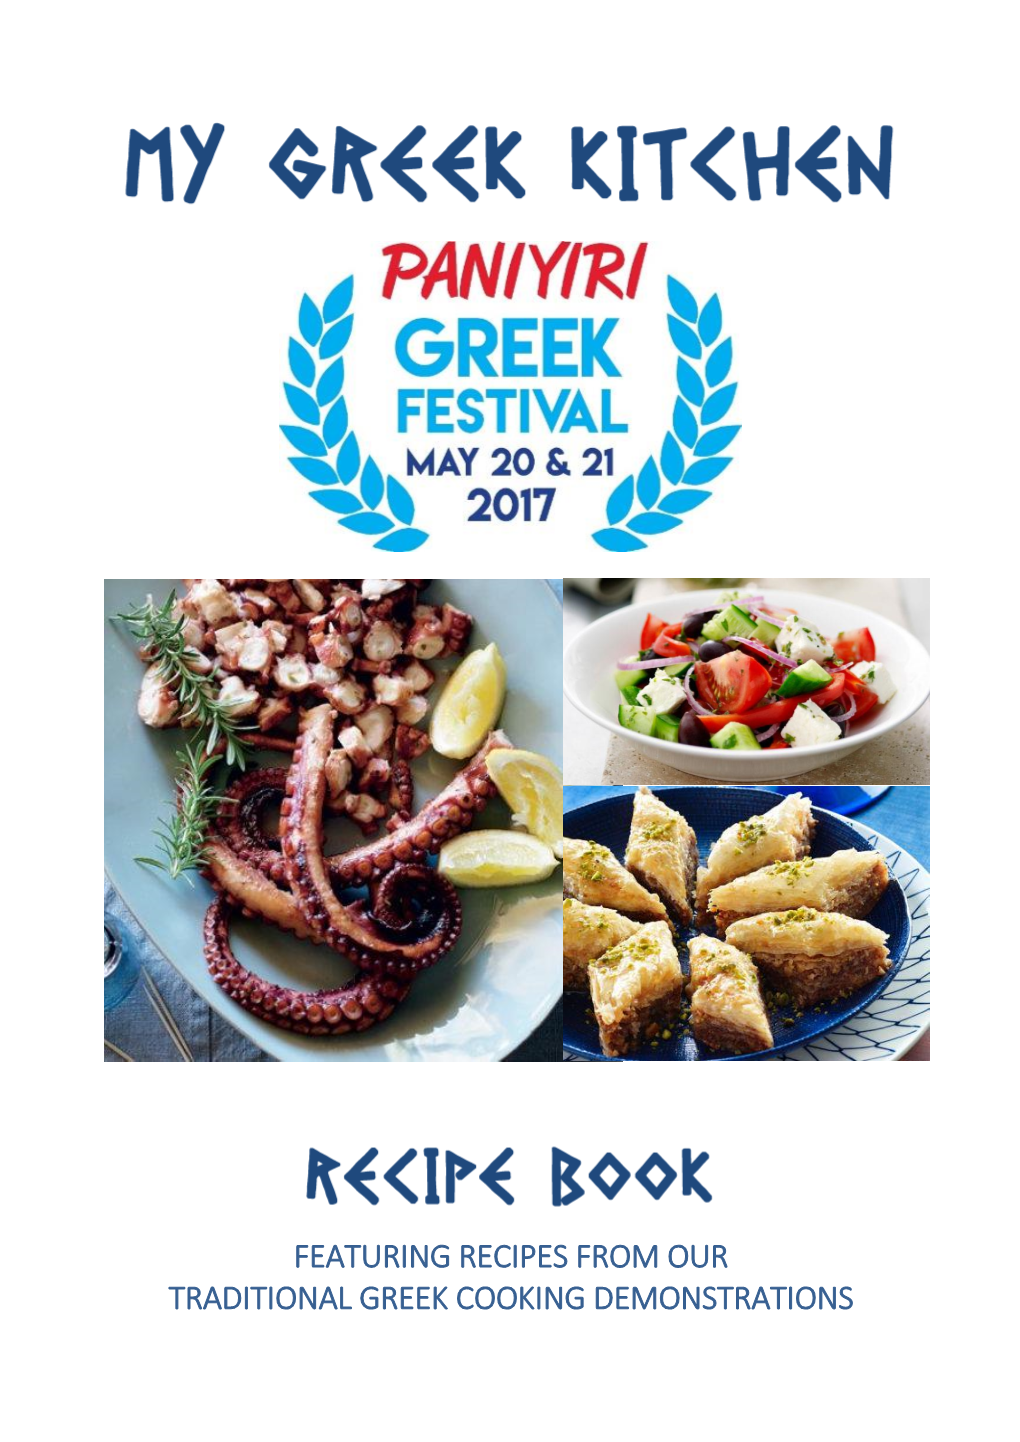 Featuring Recipes from Our Traditional Greek Cooking Demonstrations